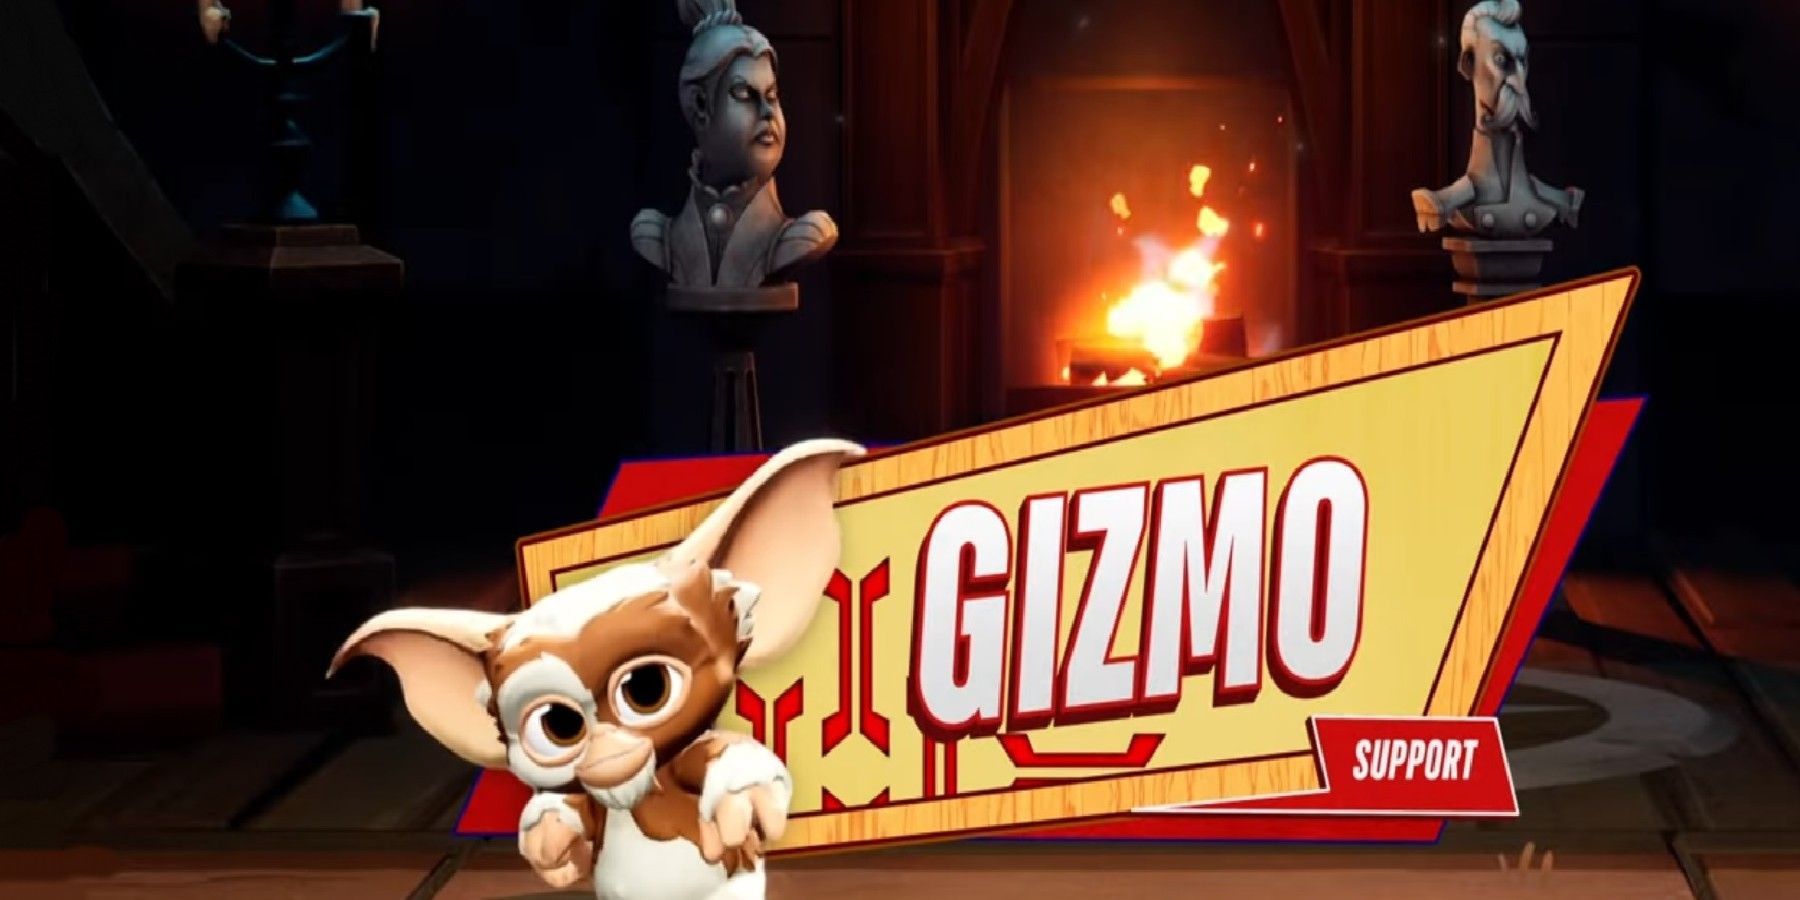 Gizmo from Gremlins is coming to MultiVersus next week